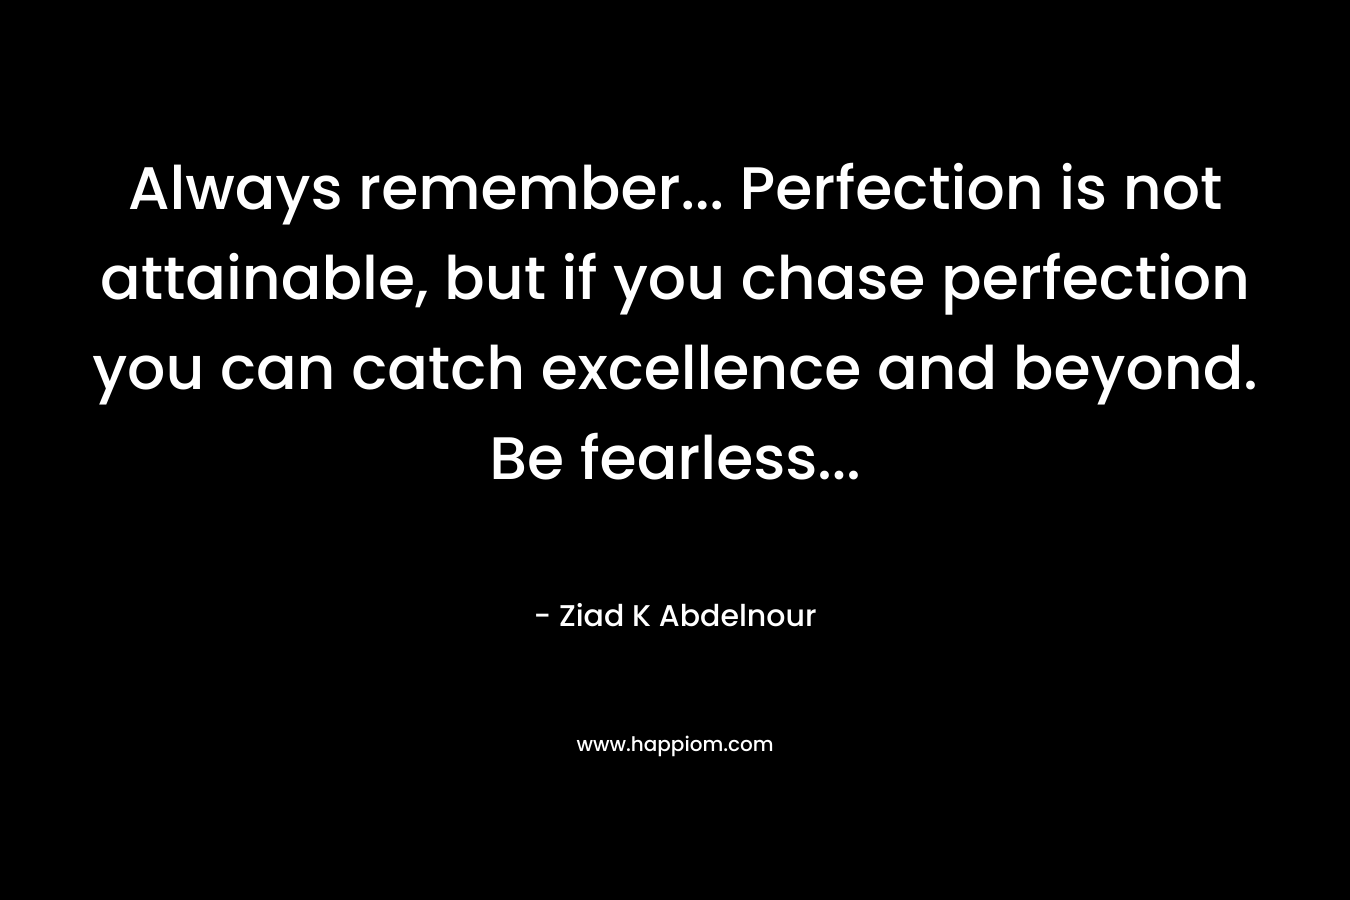 Always remember… Perfection is not attainable, but if you chase perfection you can catch excellence and beyond. Be fearless… – Ziad K Abdelnour